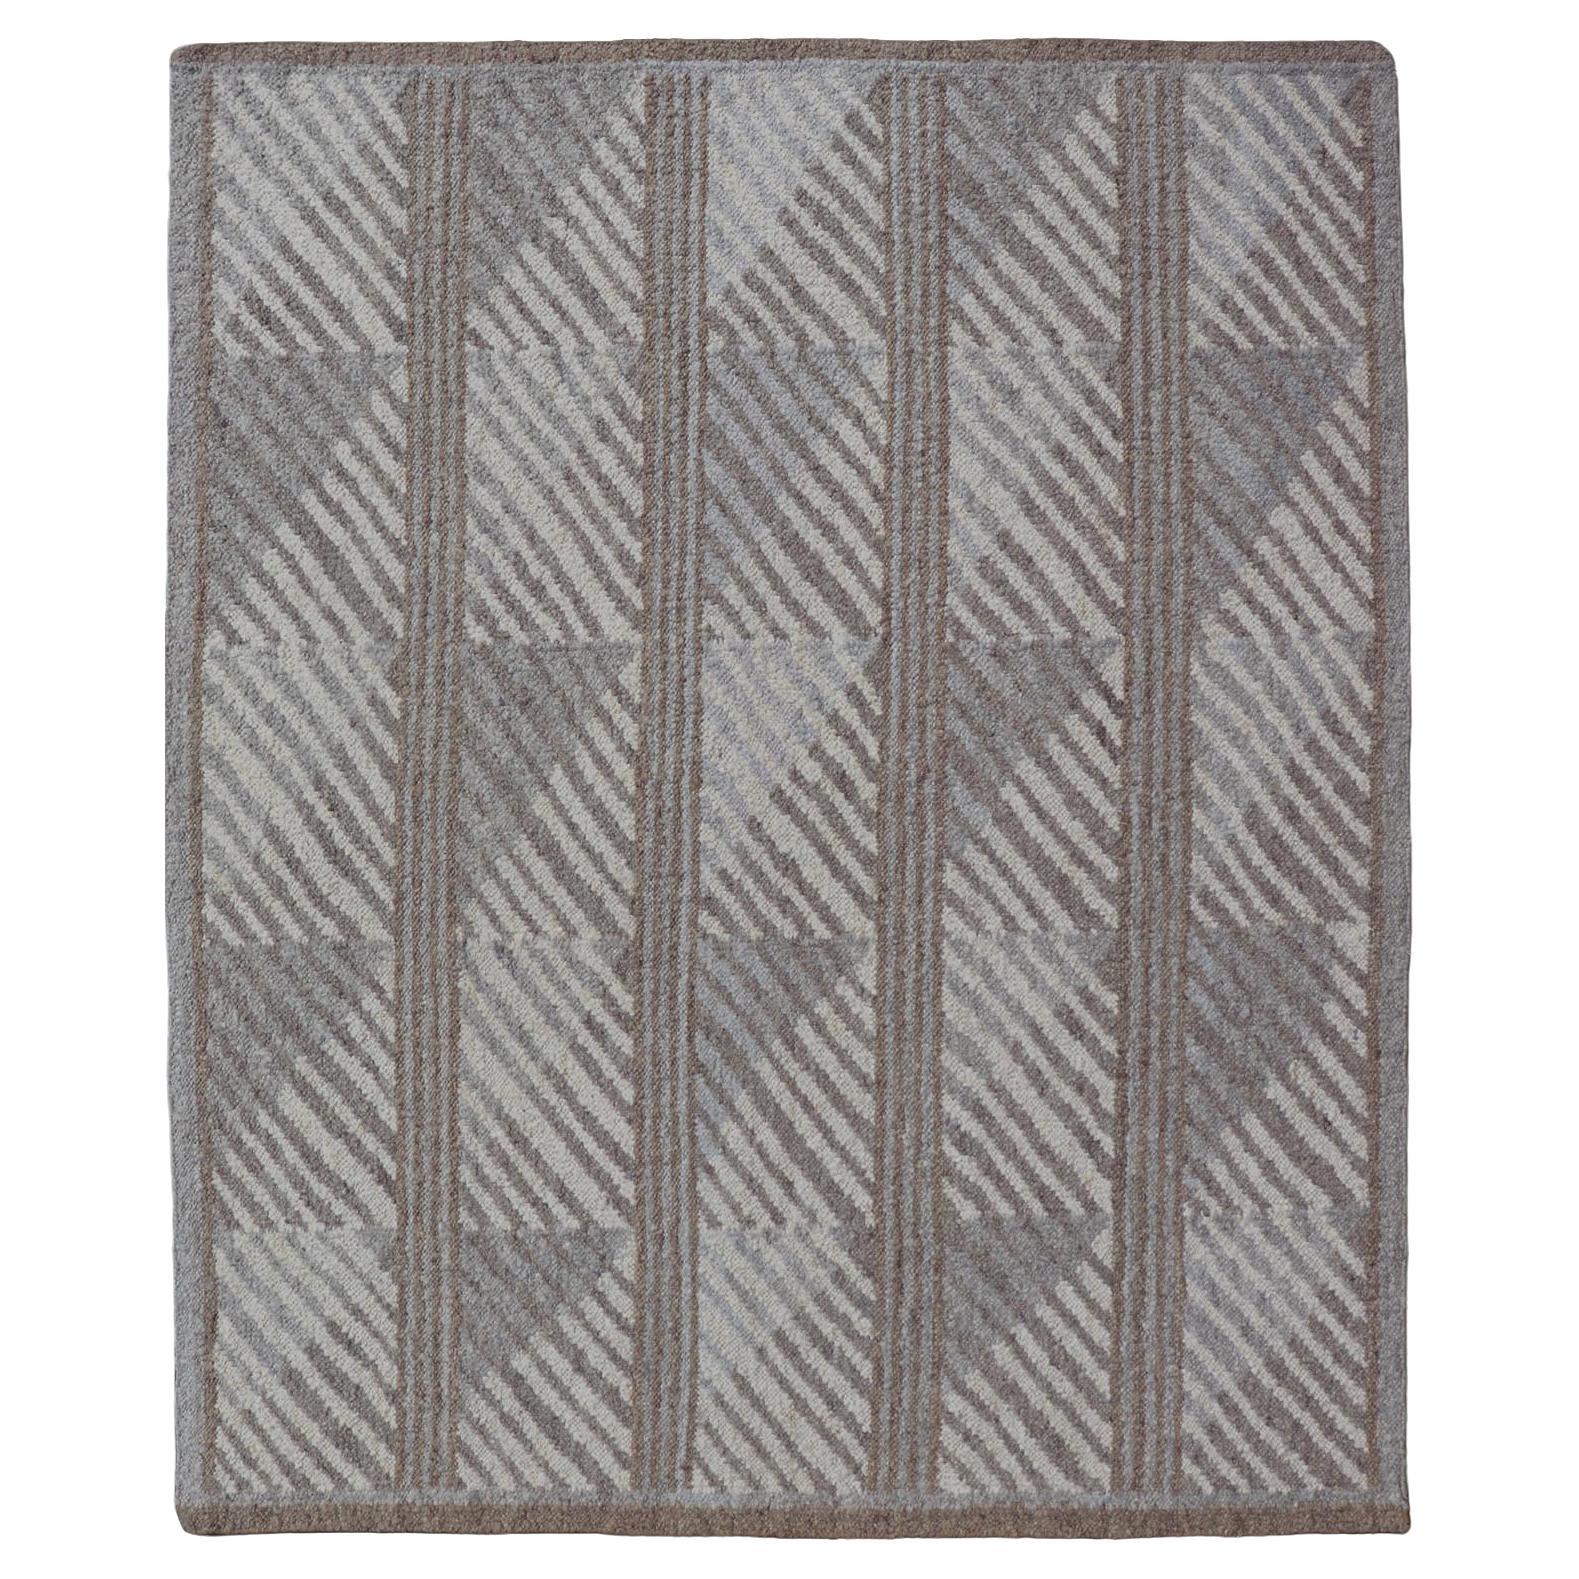 Modern Scandinavian Flat-Weave Rug With Modern Design in Gray, Ivory, Tan Tones For Sale